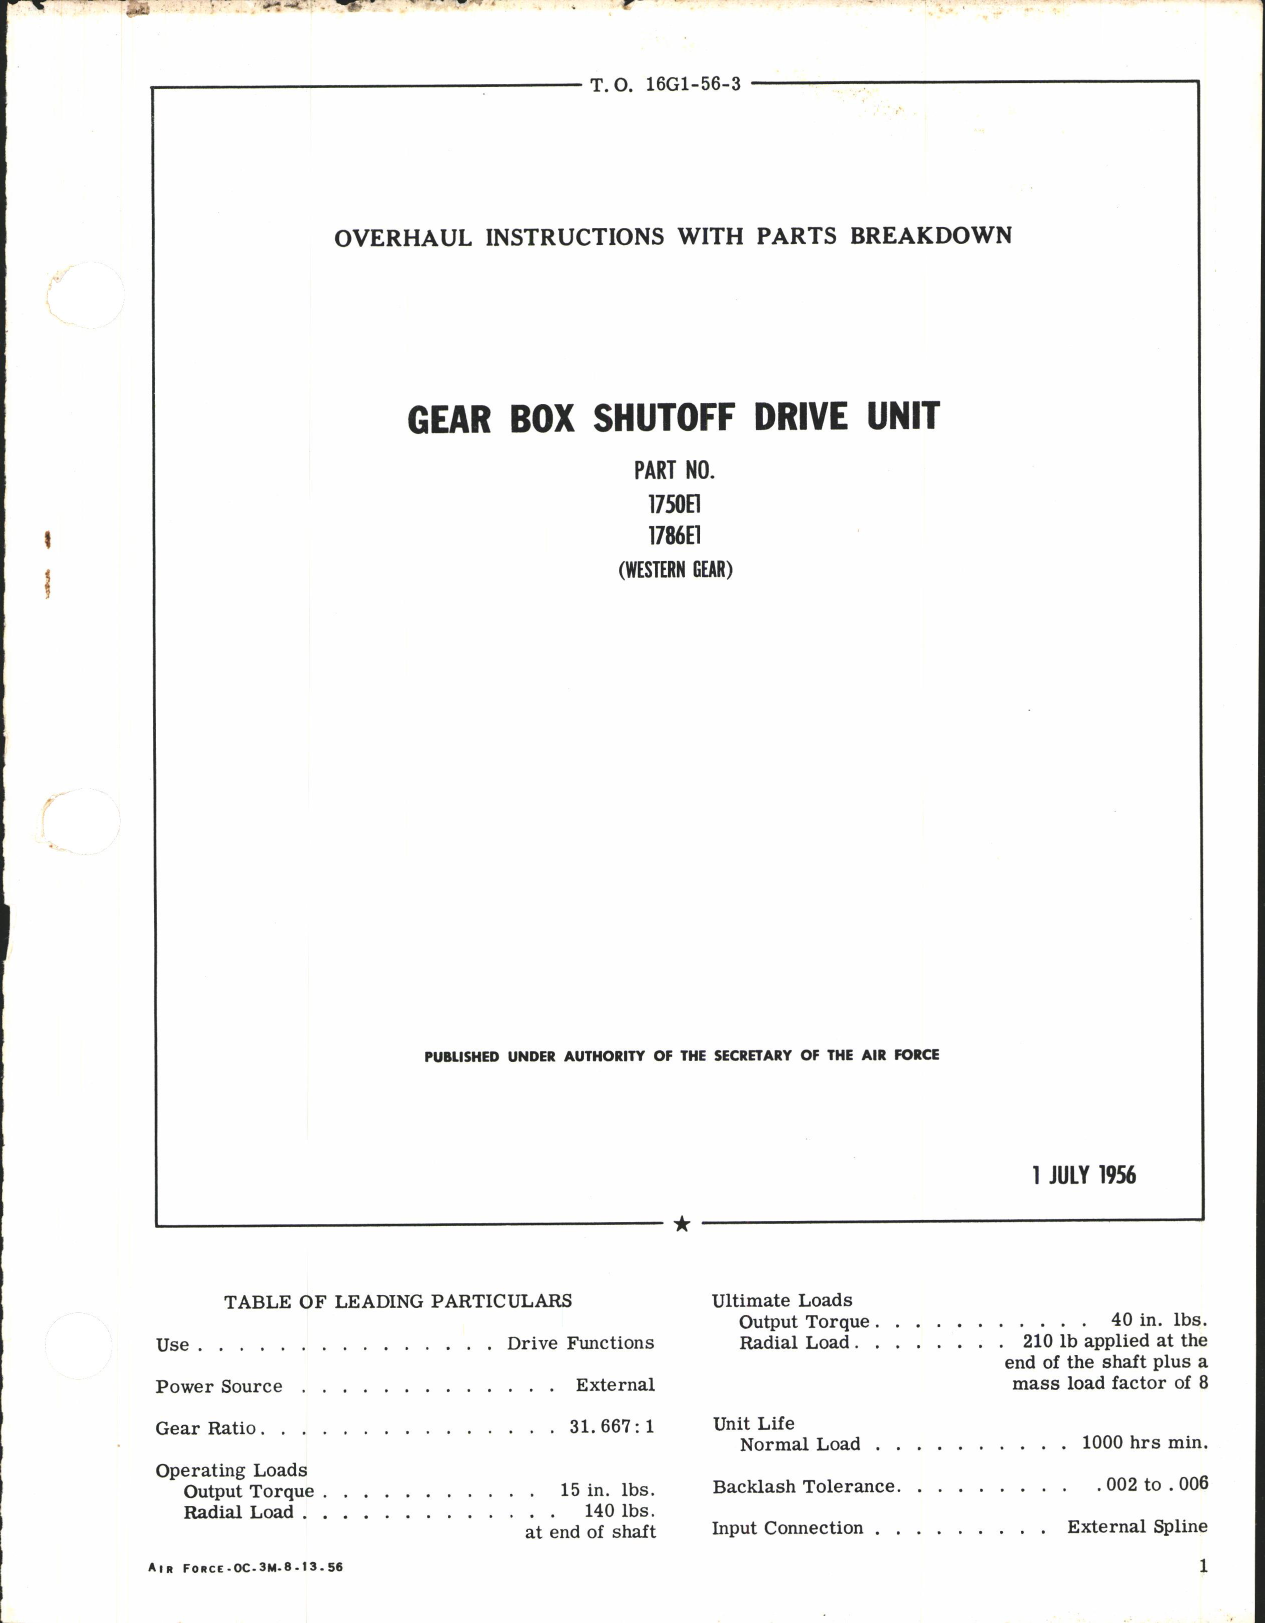 Sample page 1 from AirCorps Library document: Overhaul Instructions with Parts Breakdown for Gear Box Shutoff Drive Unit Part No. 1750E1and 1786E1